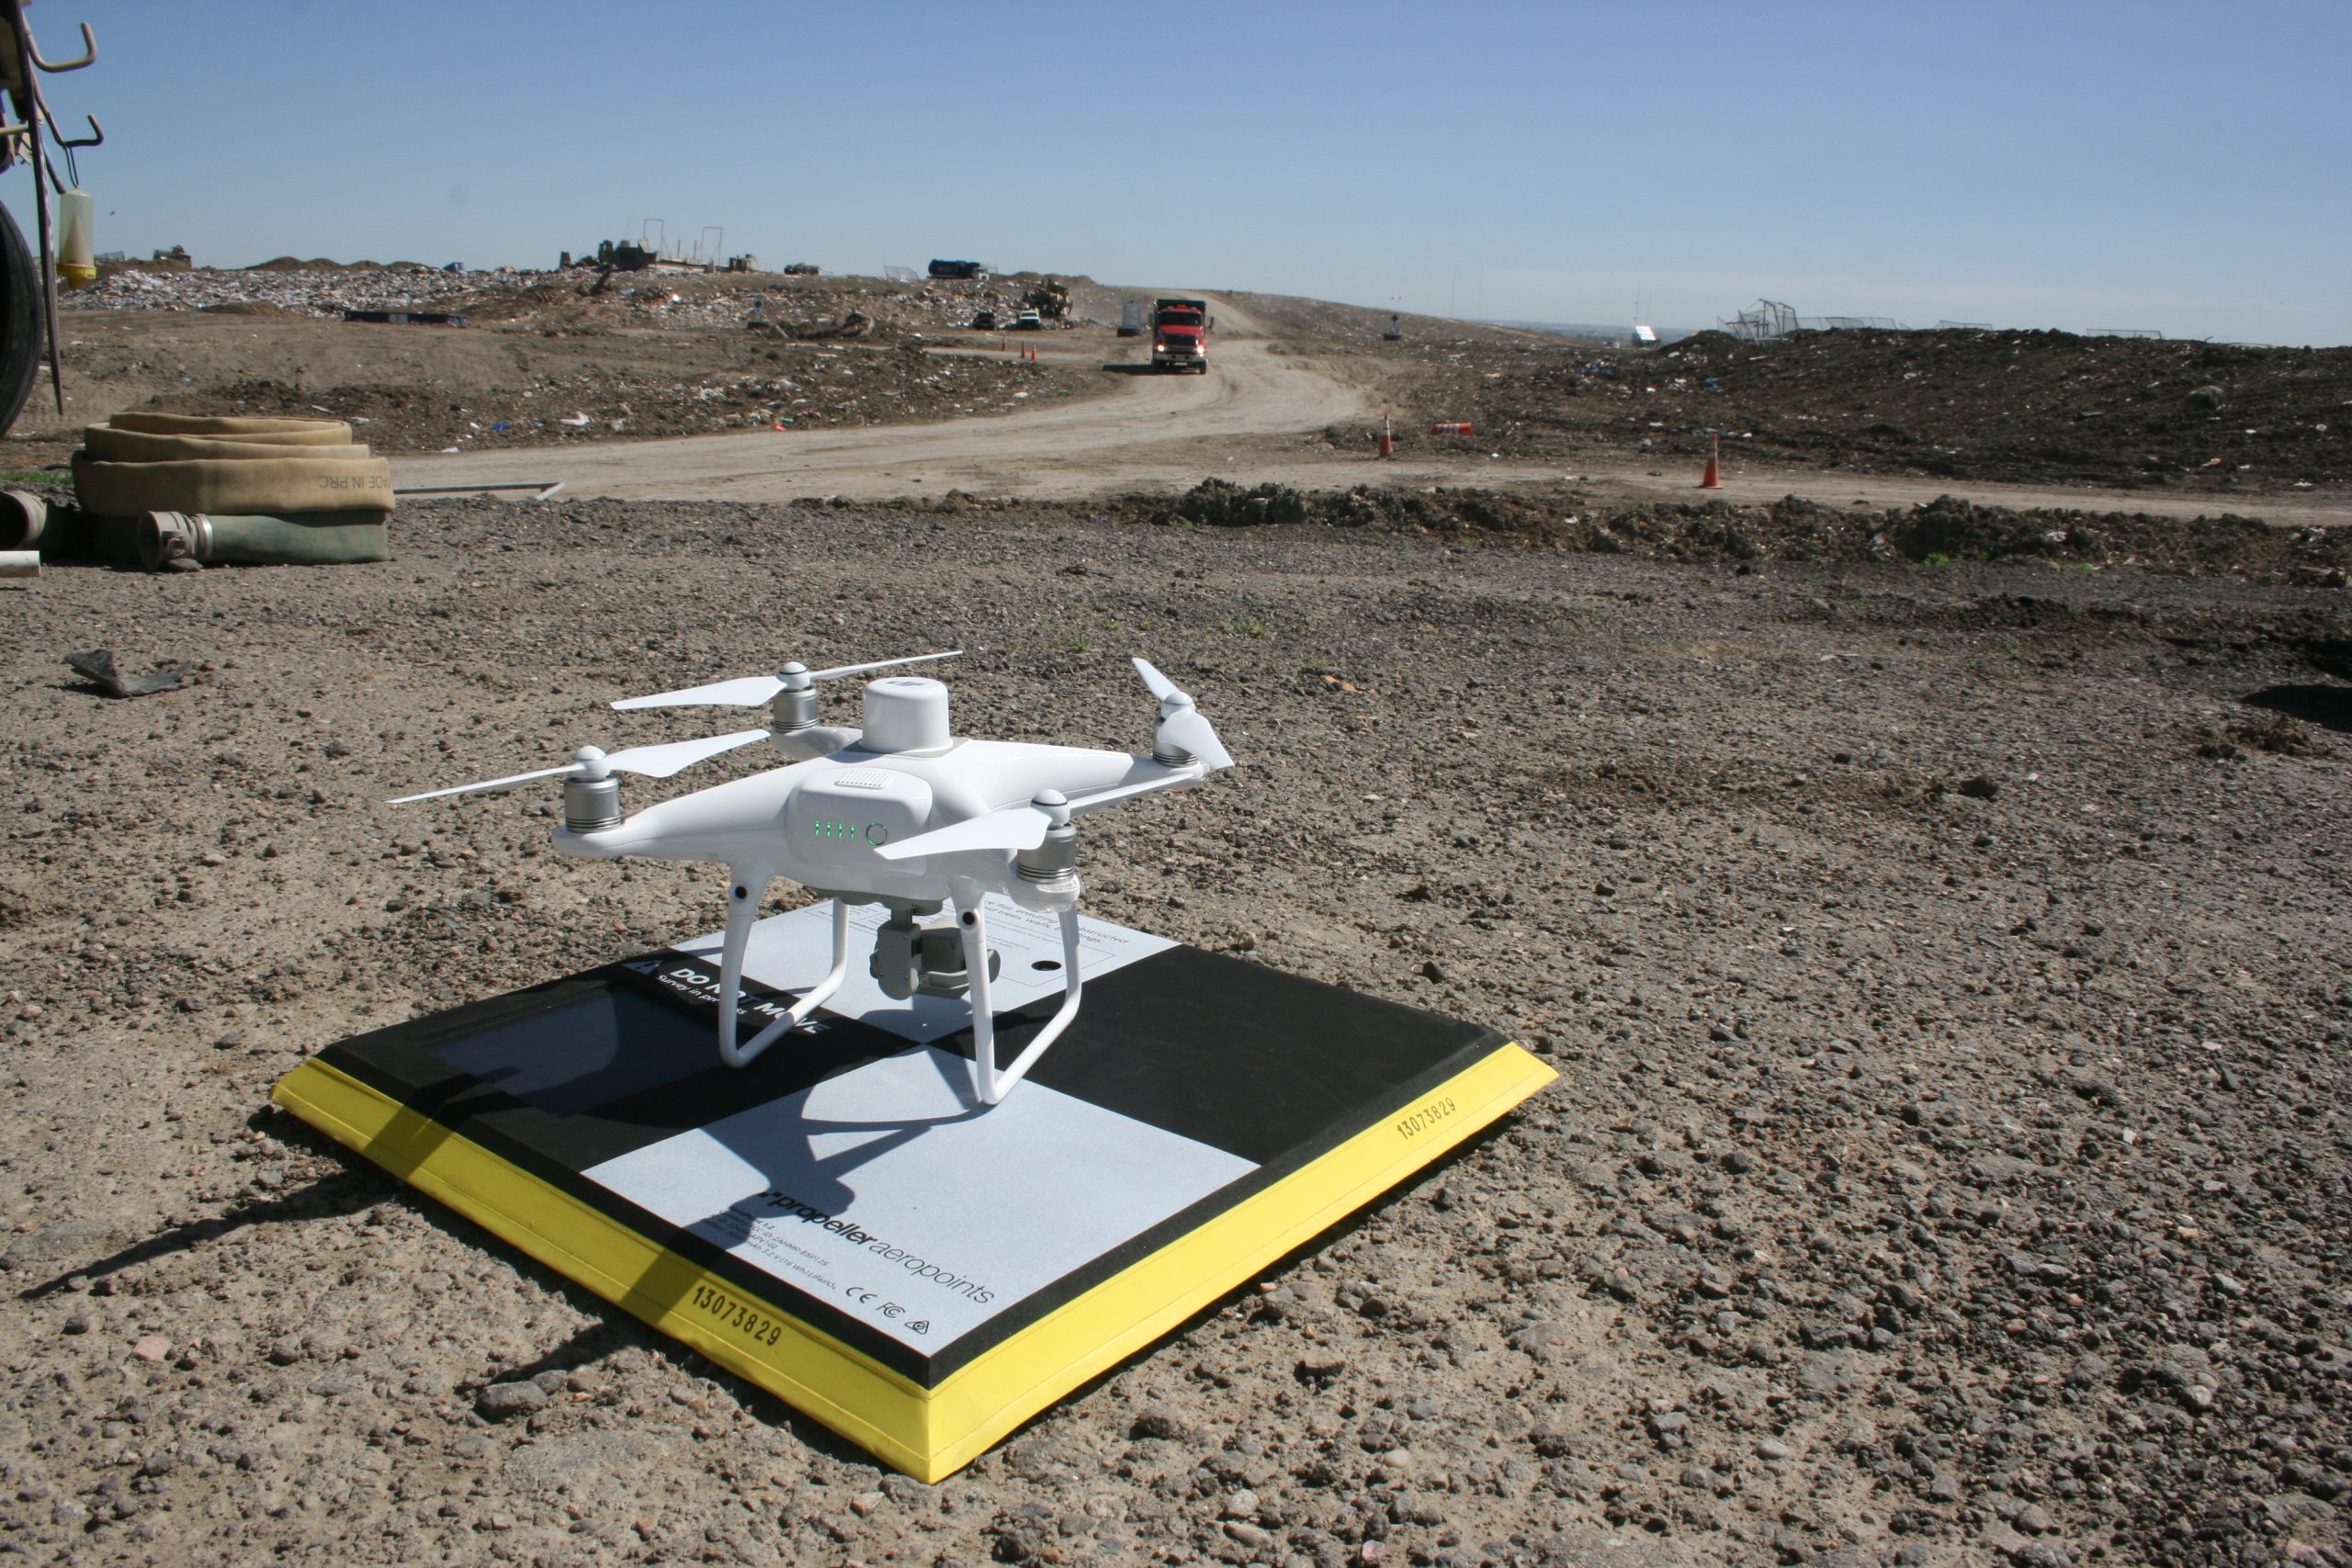 PPK drone and AeroPoint